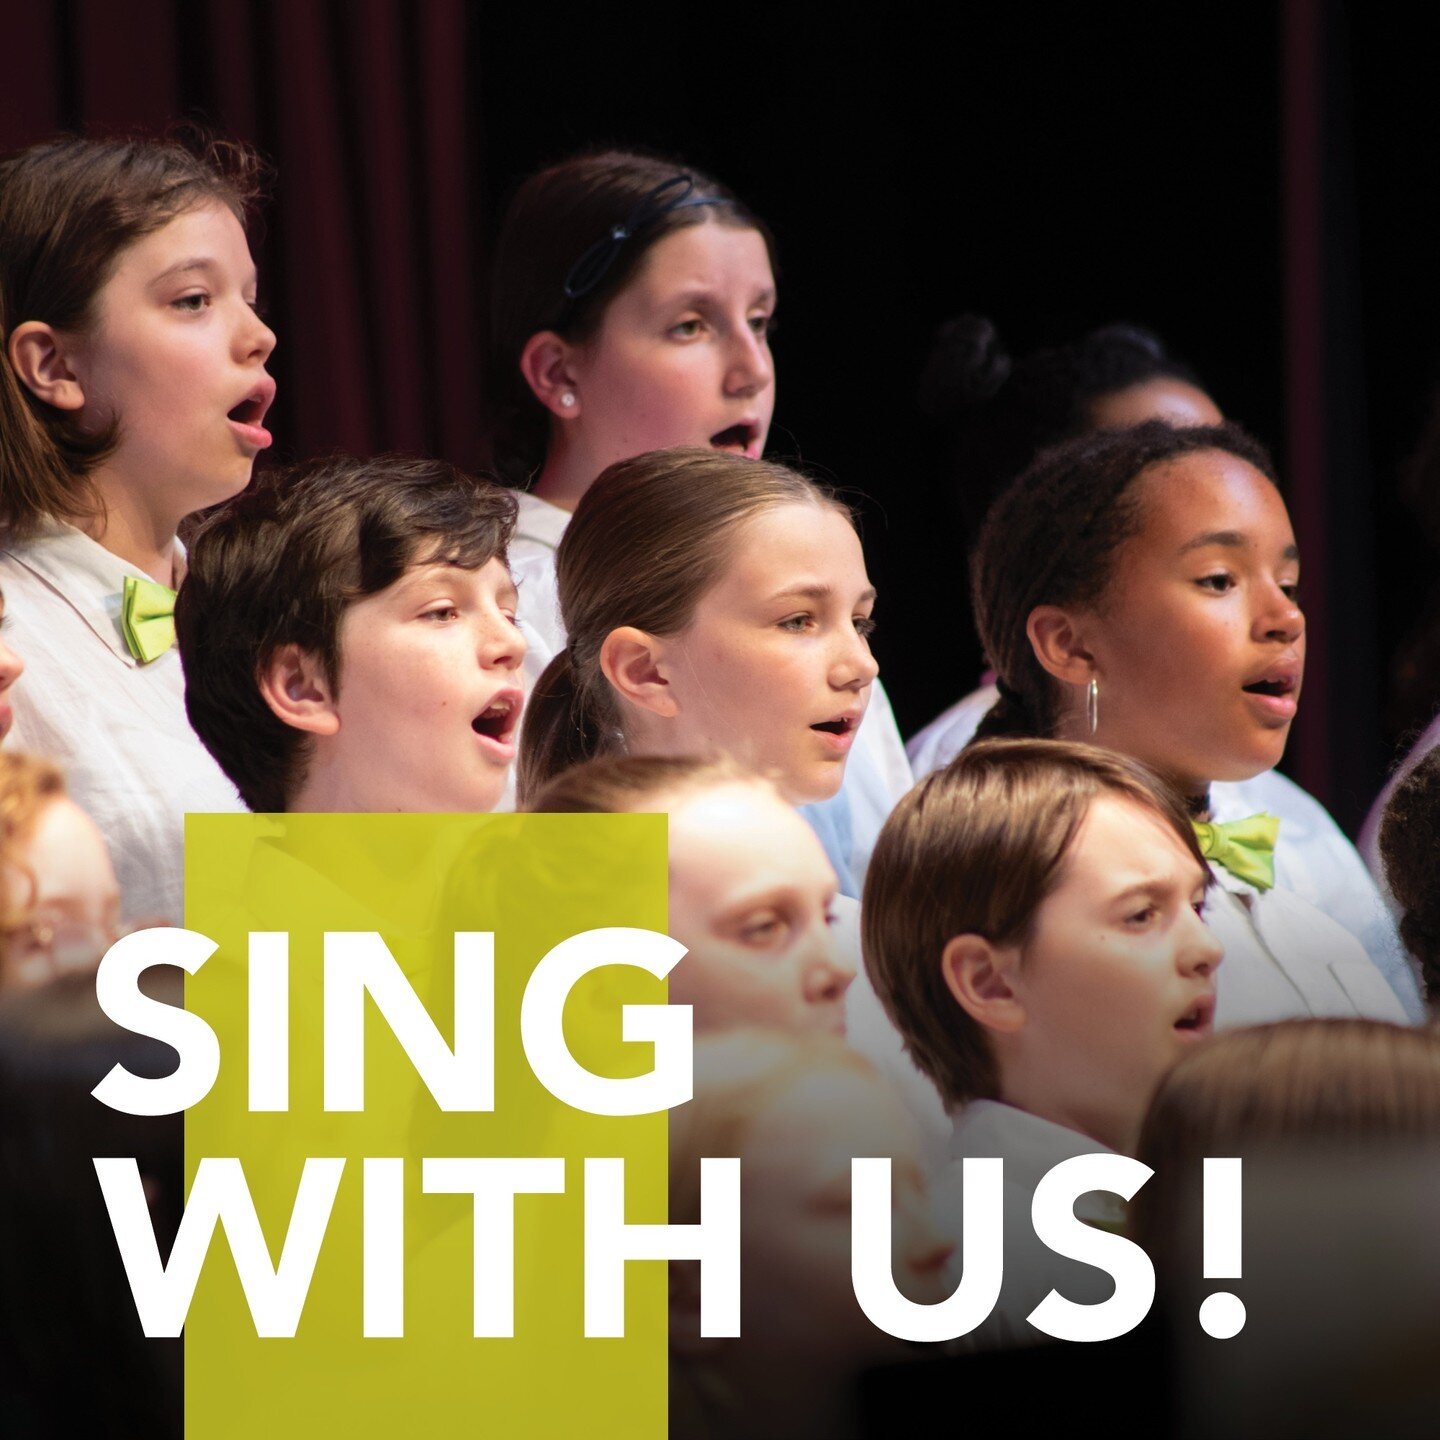 🎶 SING WITH US 🎶
Brooklyn Youth Chorus is holding auditions for the 2024/25 season. Children who will be ages 7-18 during the 2024/25 school year are eligible to audition.

**Upcoming Auditions**
Thursday, May 2, 2024 / 3:30-5:30PM
Friday, May 10, 